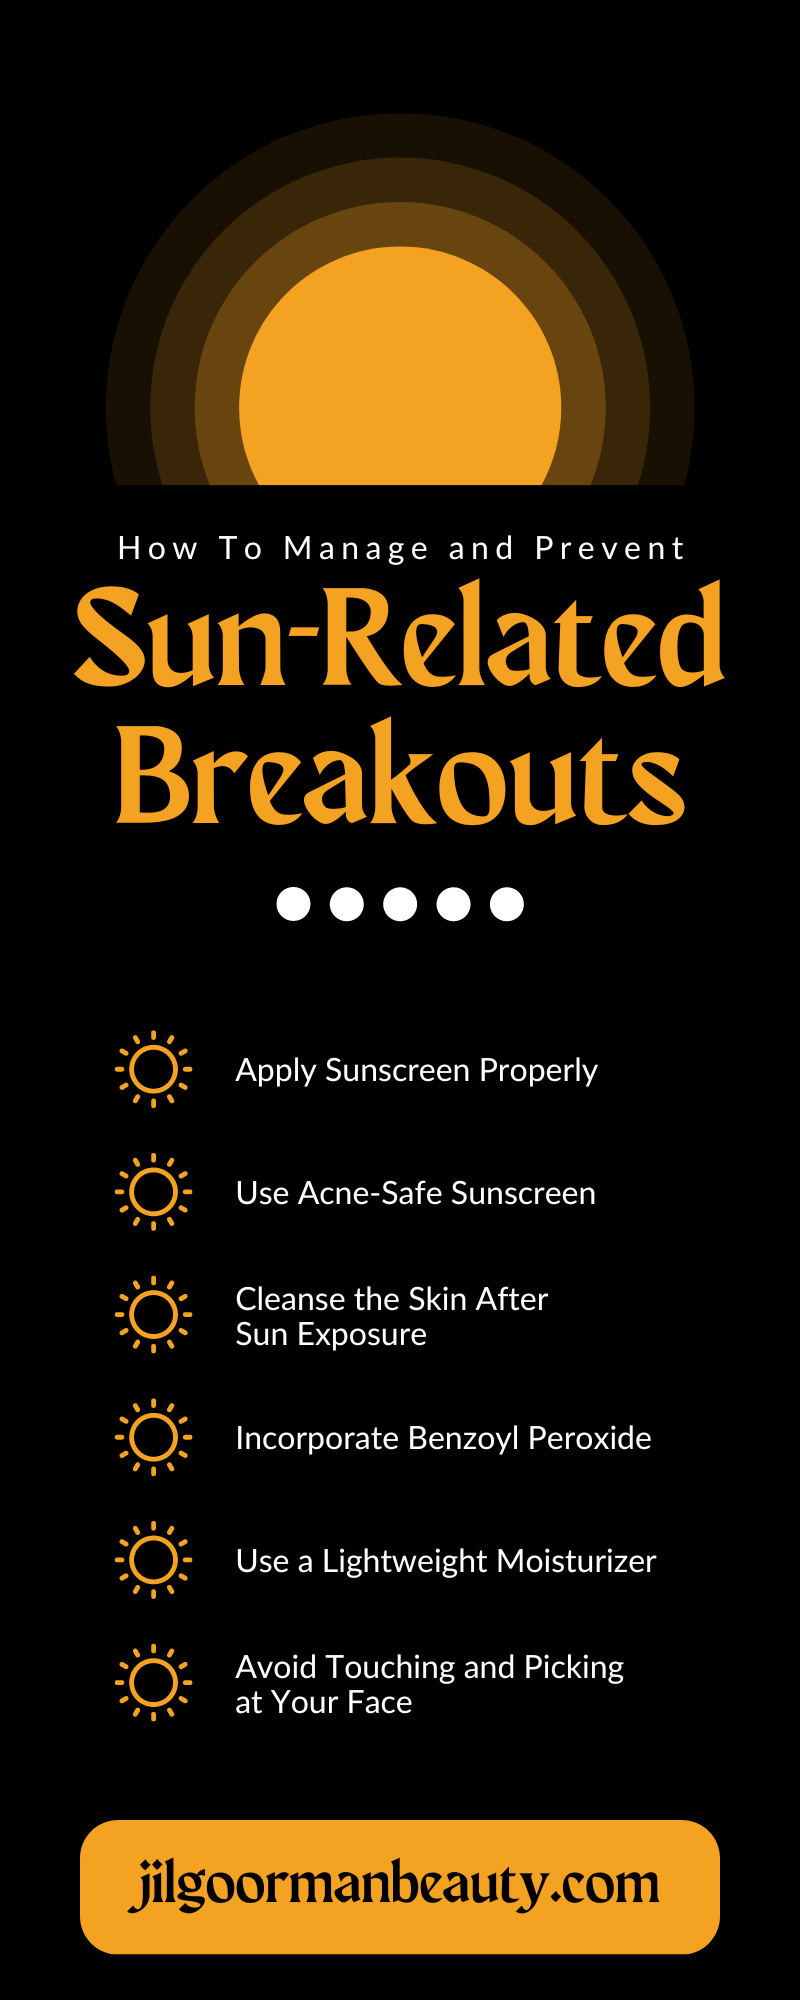 How To Manage and Prevent Sun-Related Breakouts